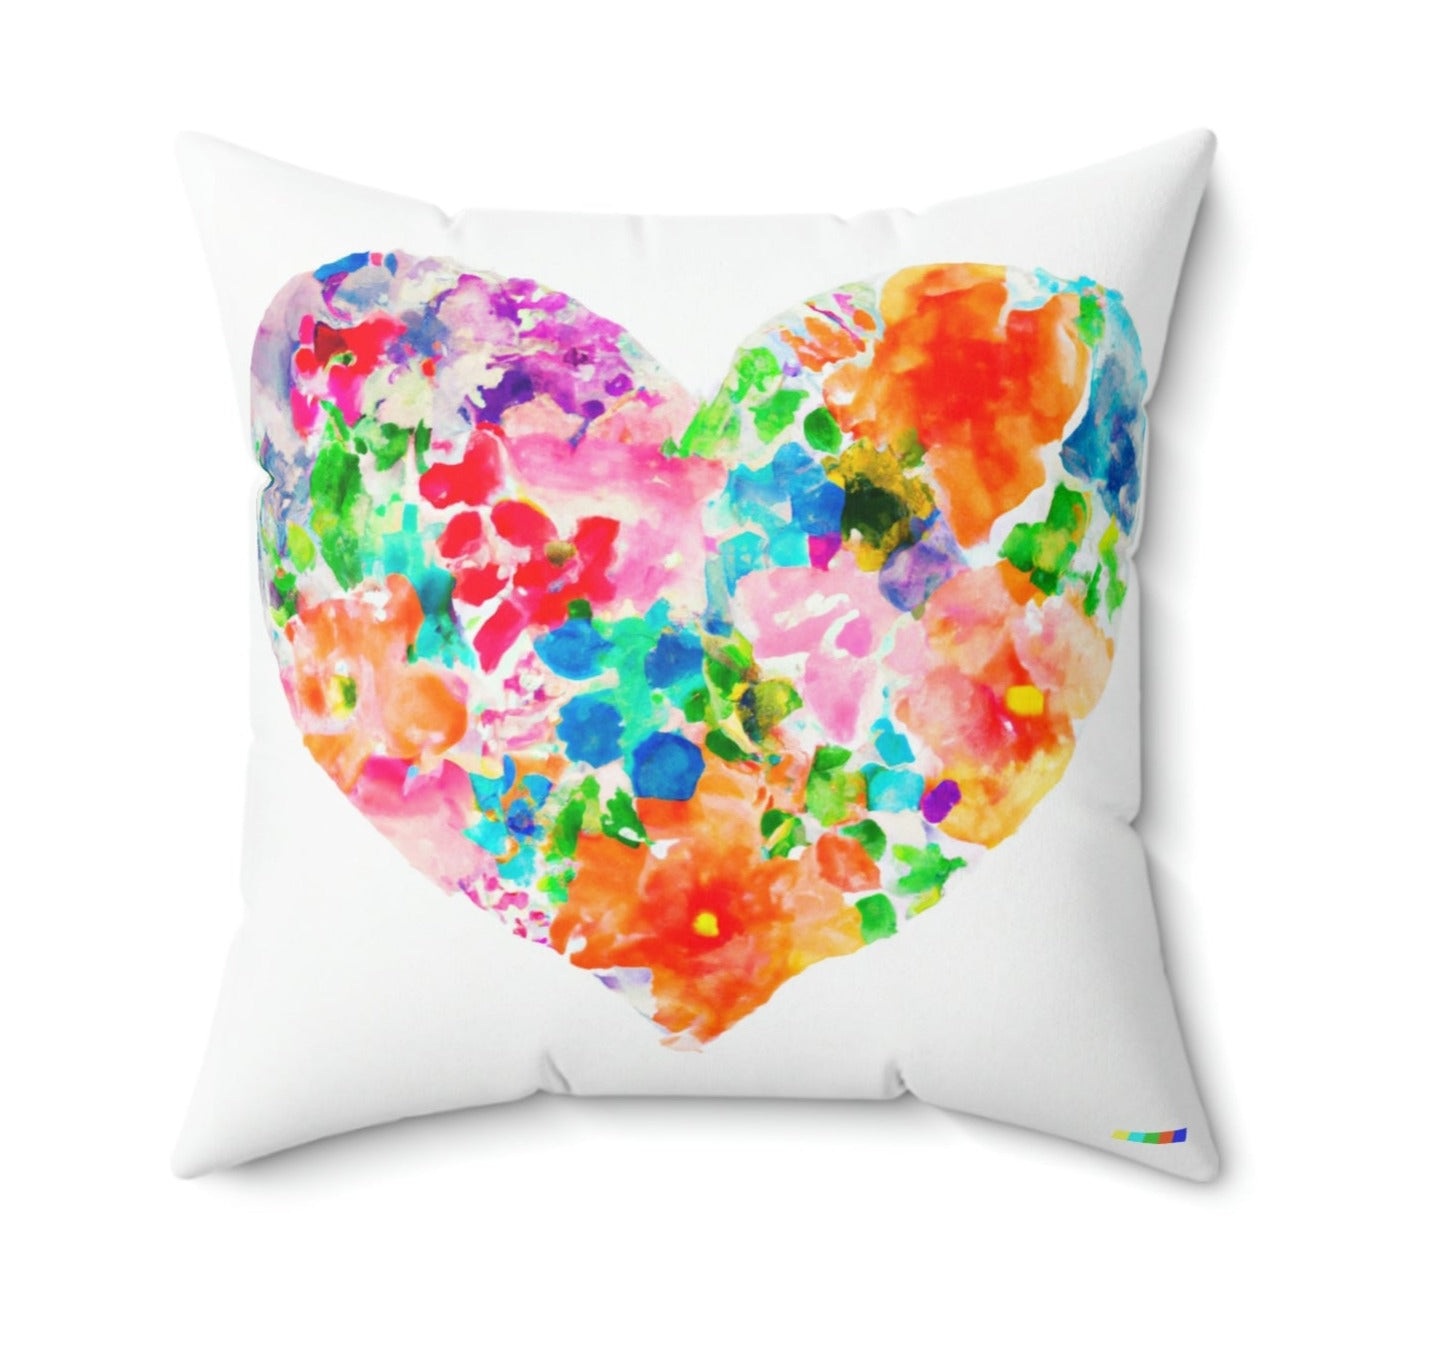 Everyone loves to snuggle up with a pillow. These adorable flower hearts spun polyester square pillows are a lovely way to enjoy Valentines' day and show love for your friends and family.  Room accents shouldn't be underrated. These beautiful indoor pillows in various sizes serve as statement pieces, creating a personalized environment. 